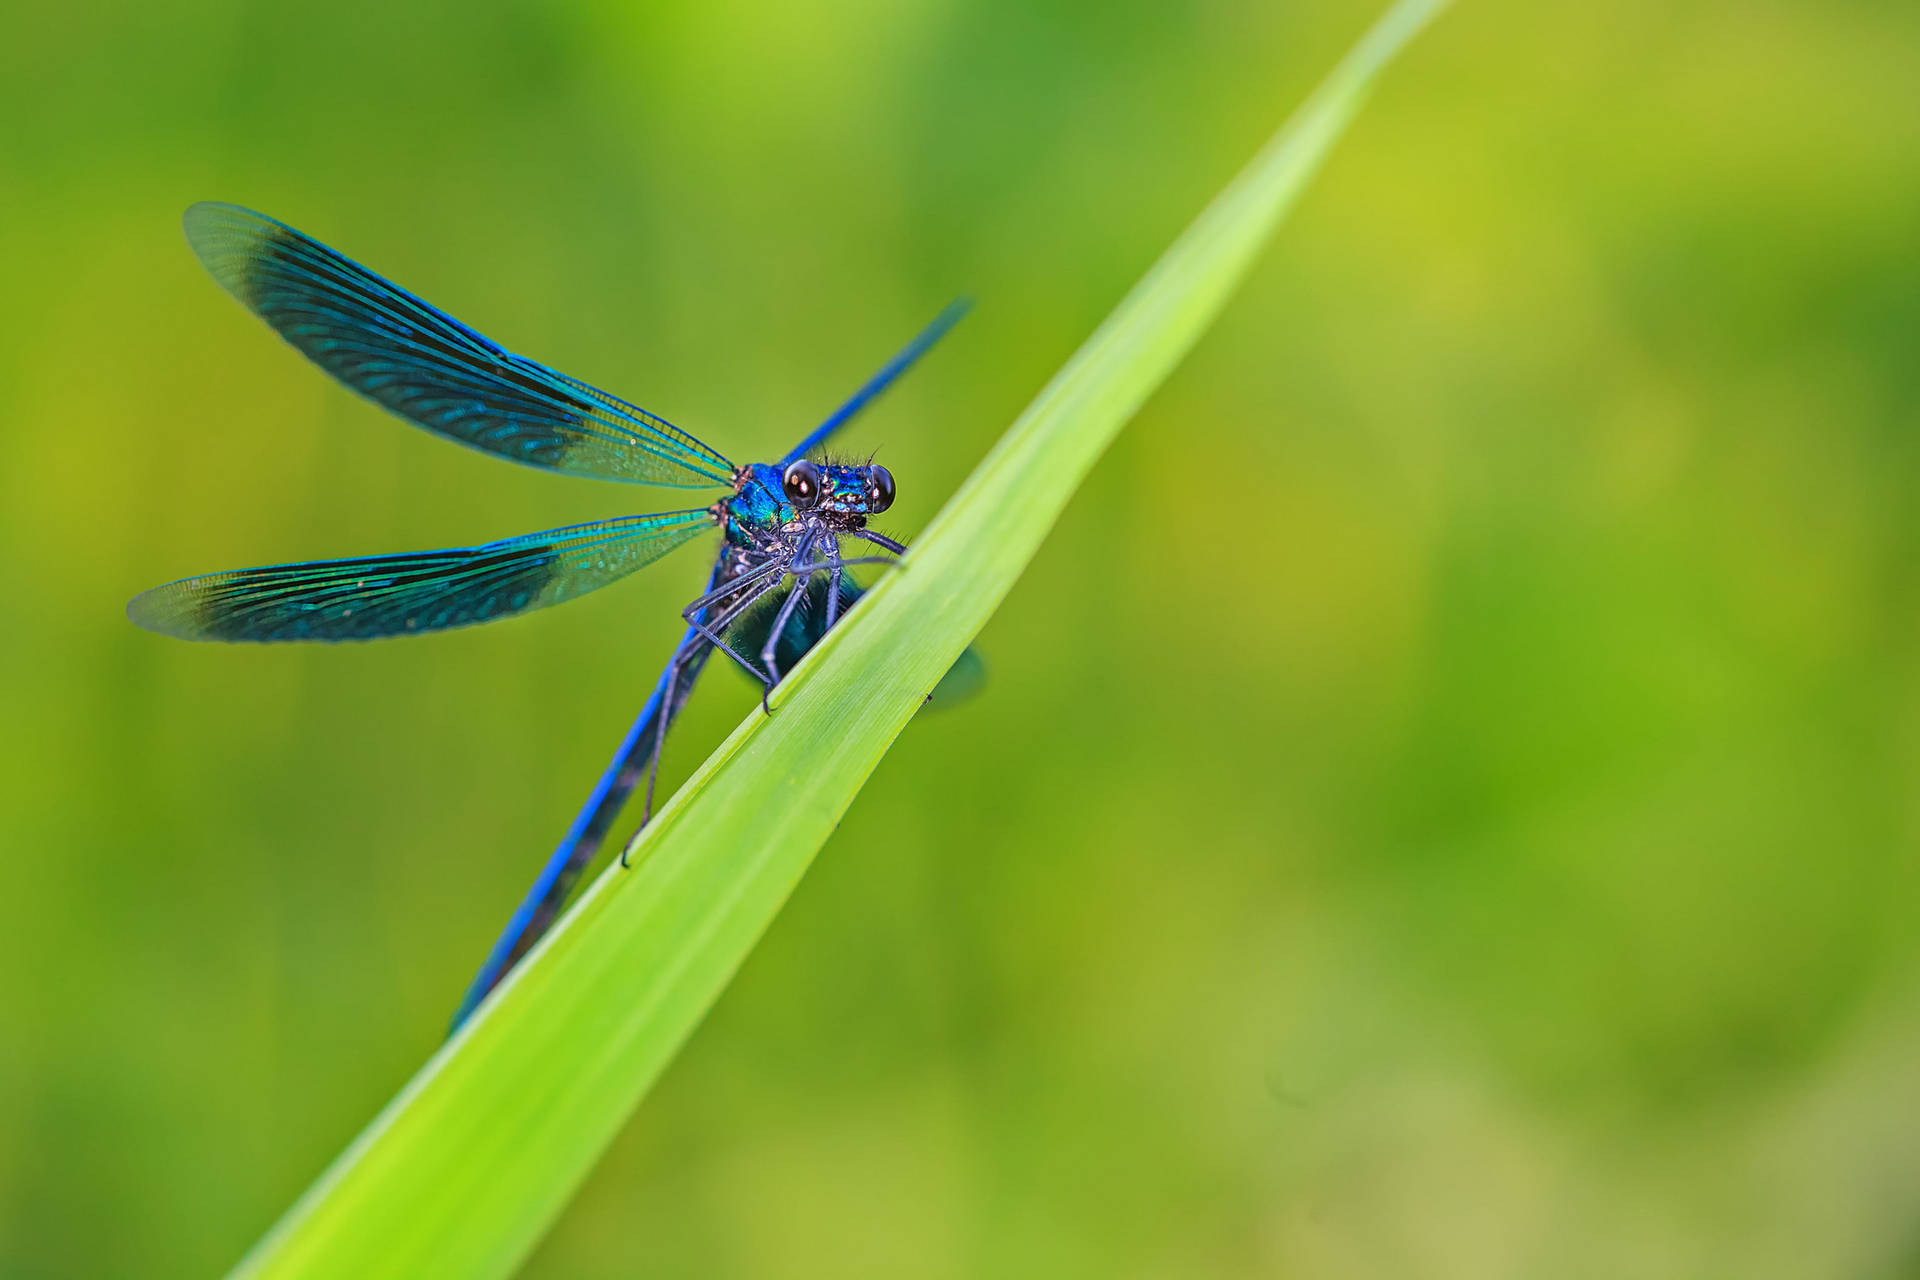 Insect Dragonfly With Blue Wings